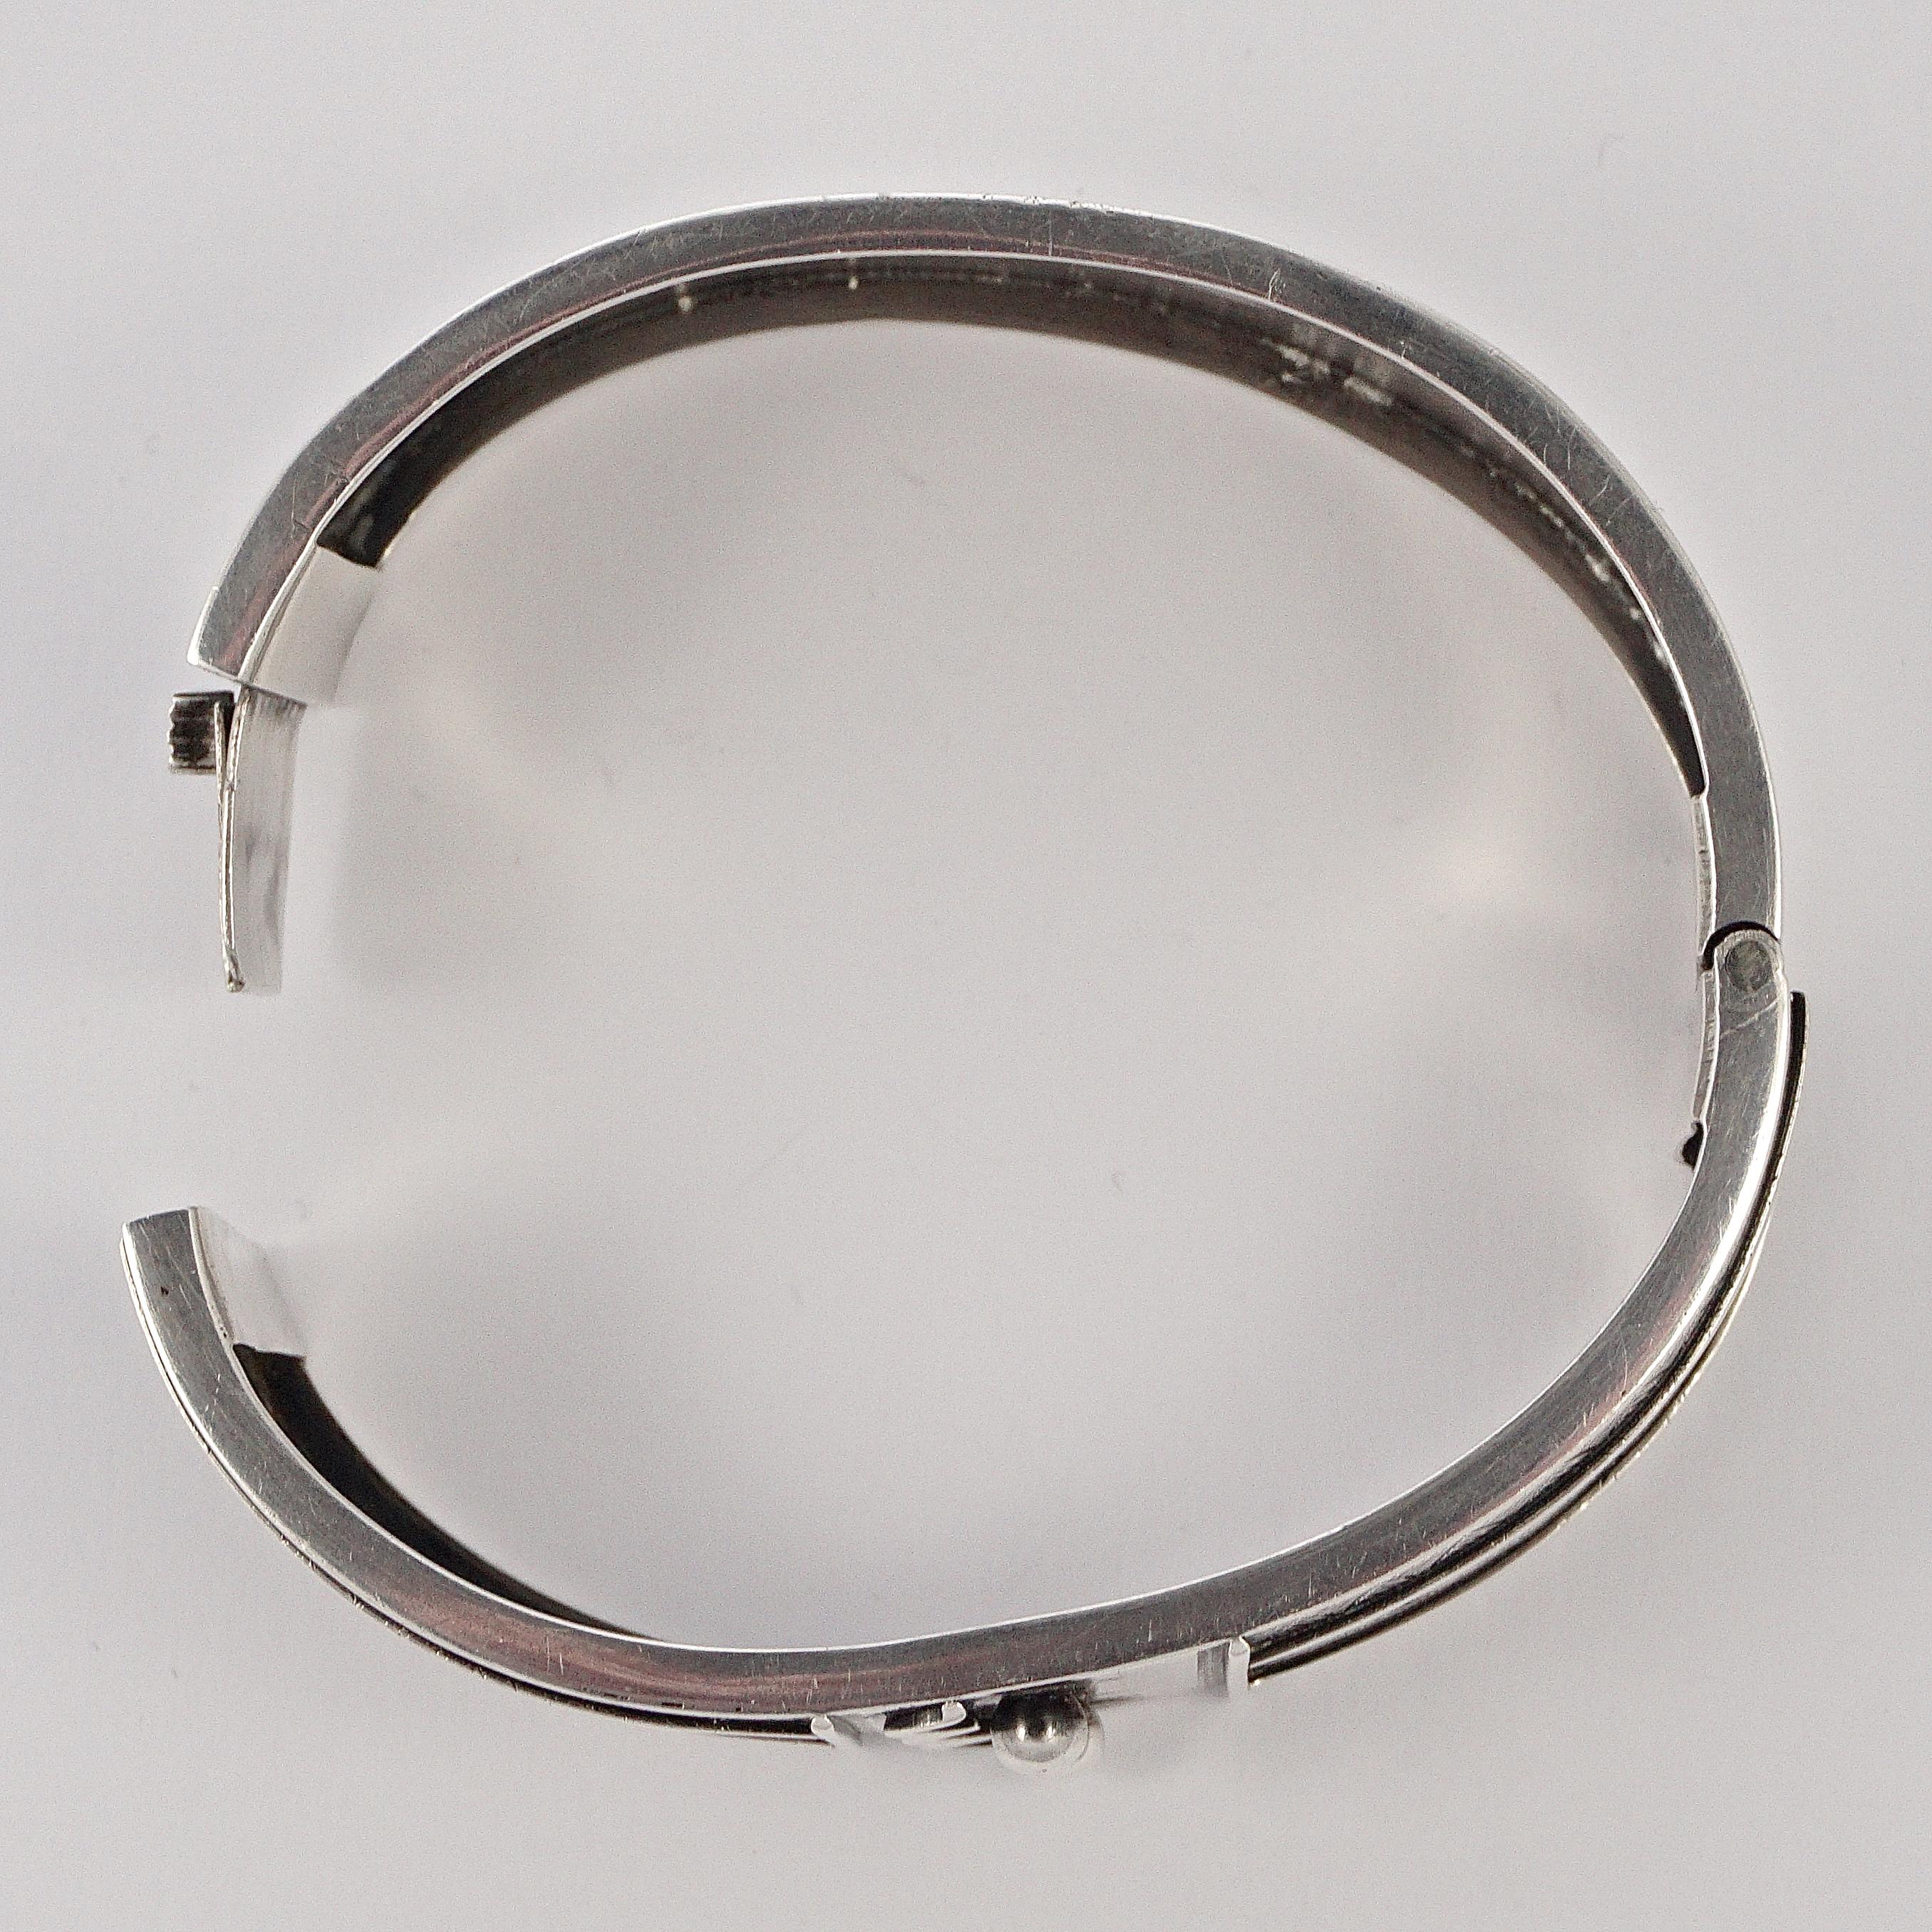 English Victorian Sterling Silver Triple Button Cuff Engraved Bangle Bracelet 6